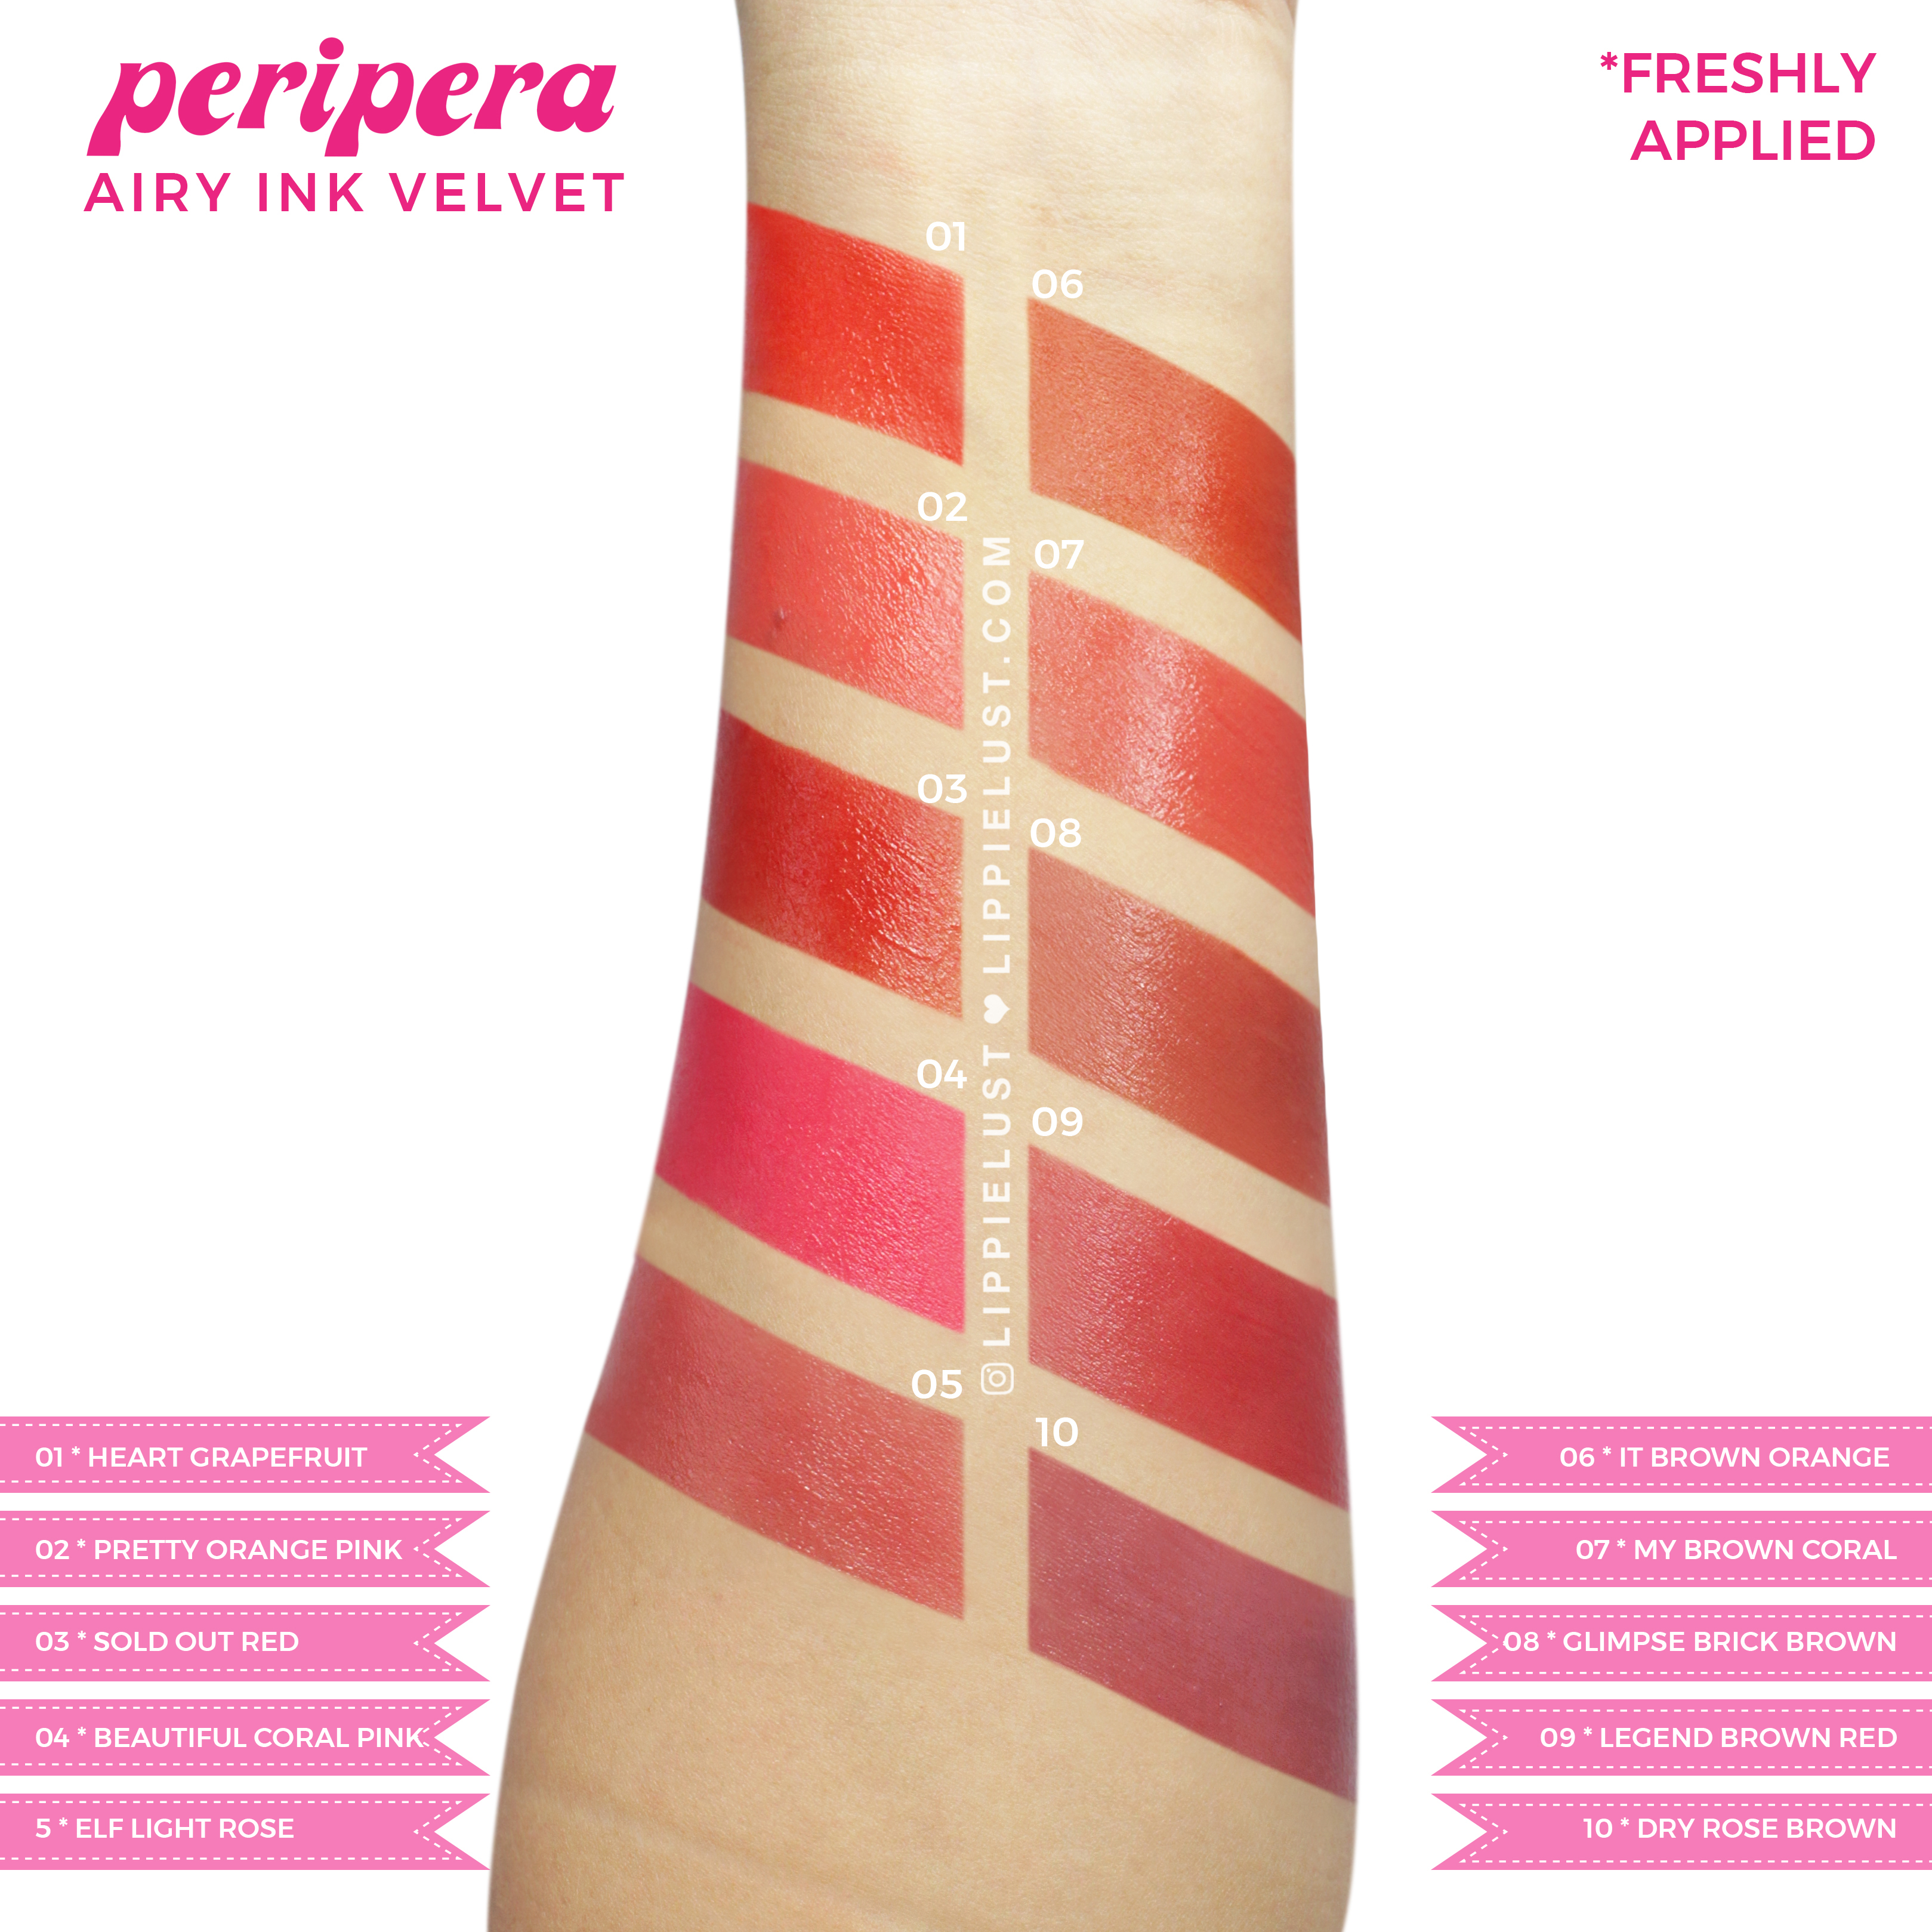 Swatch Review Peripera Ink The Airy Velvet Lip Tint All Shades Lippielust